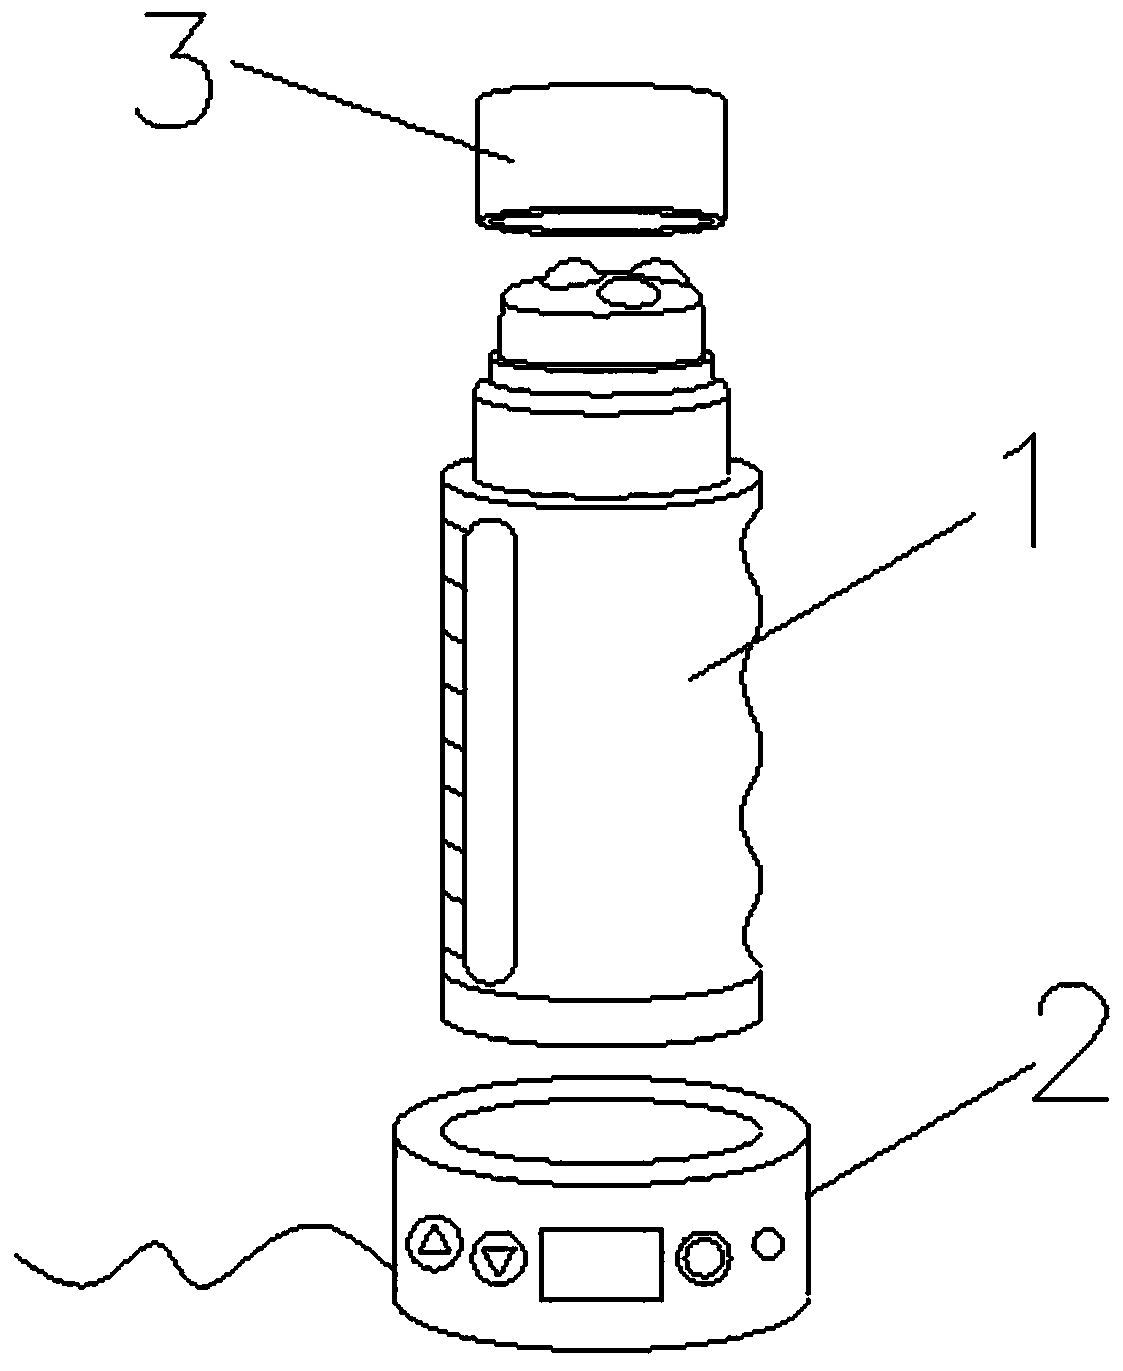 Coupling agent heating, extruding and applying device for ultrasonic medicine